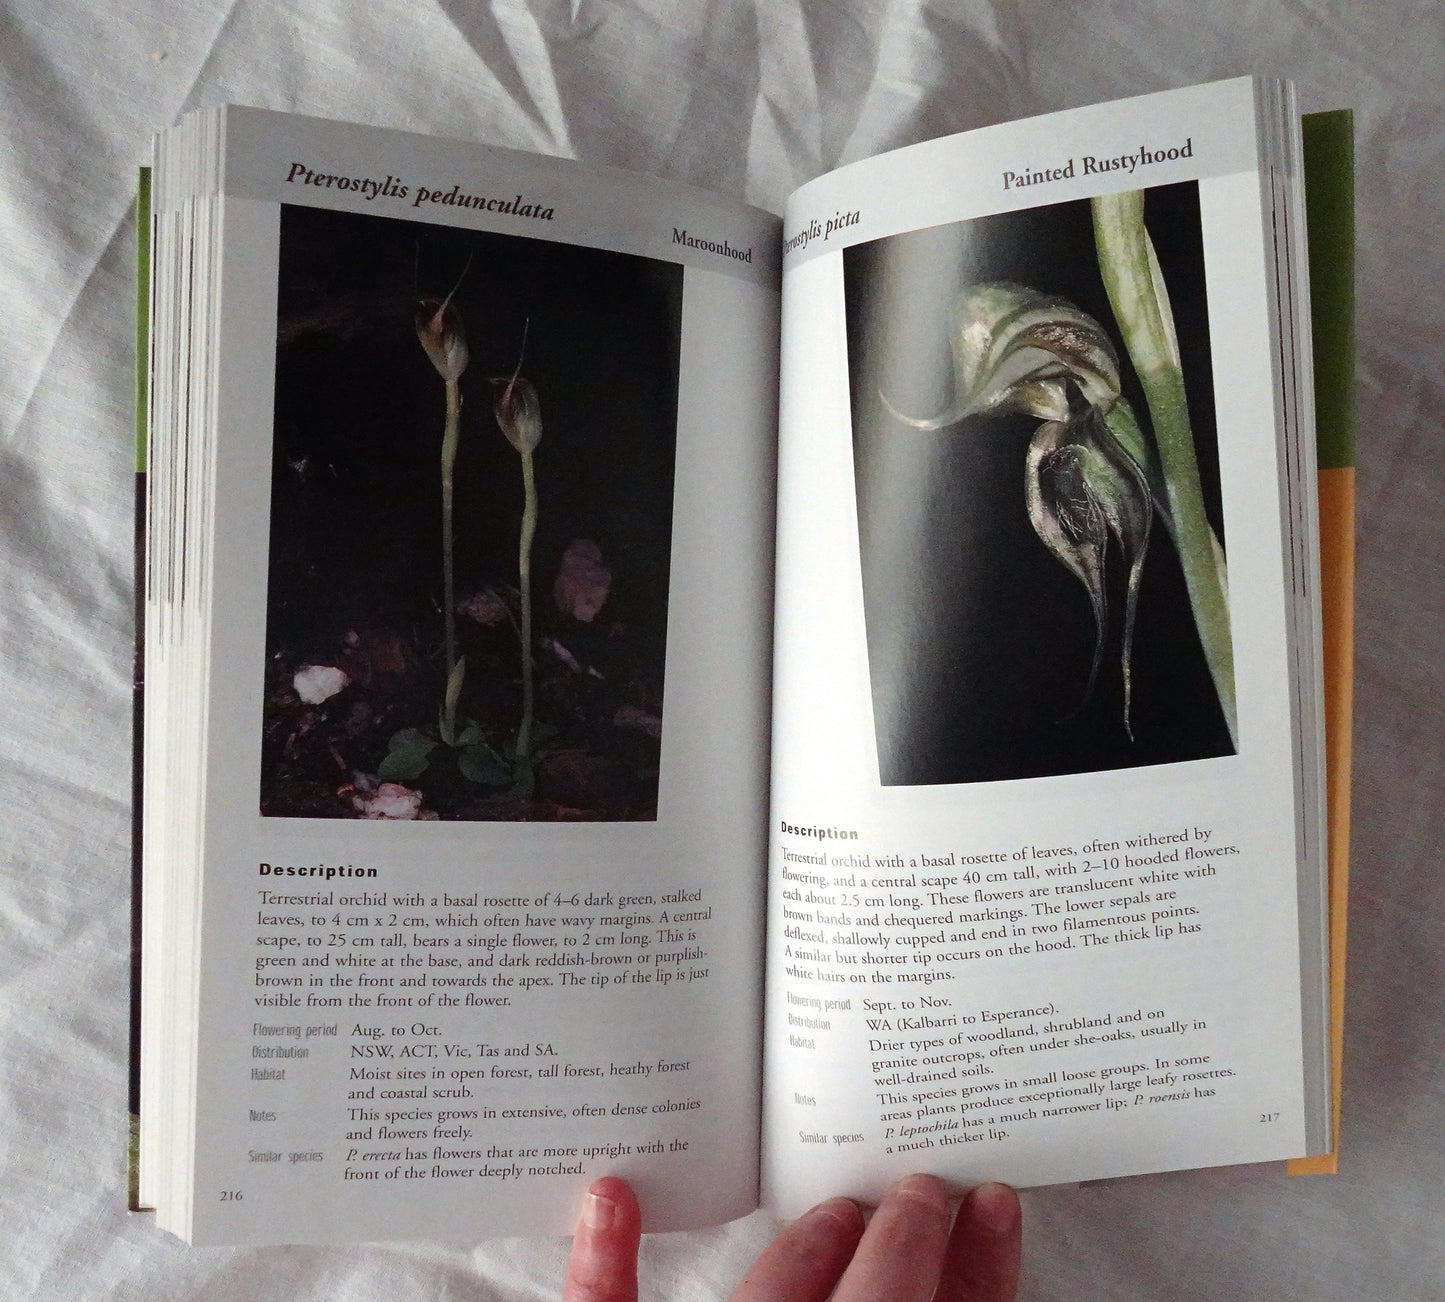 A Field Guide to the Native Orchids of Southern Australia by David and Barbara Jones